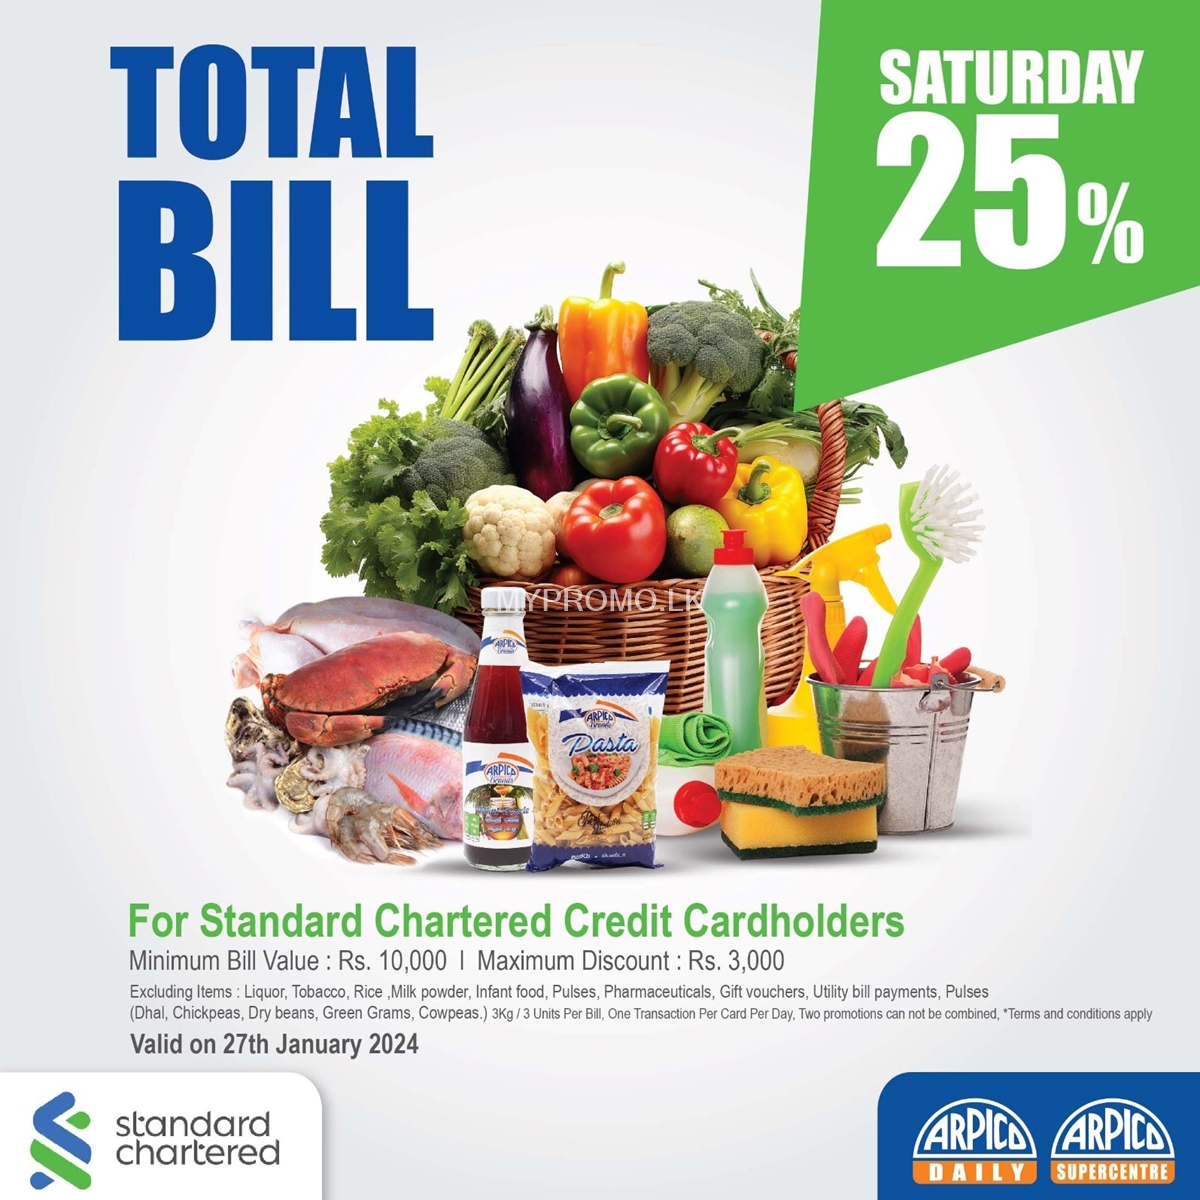 25% Off on Total Bill for Standard Charted Credit Cards at Arpico Super Centre